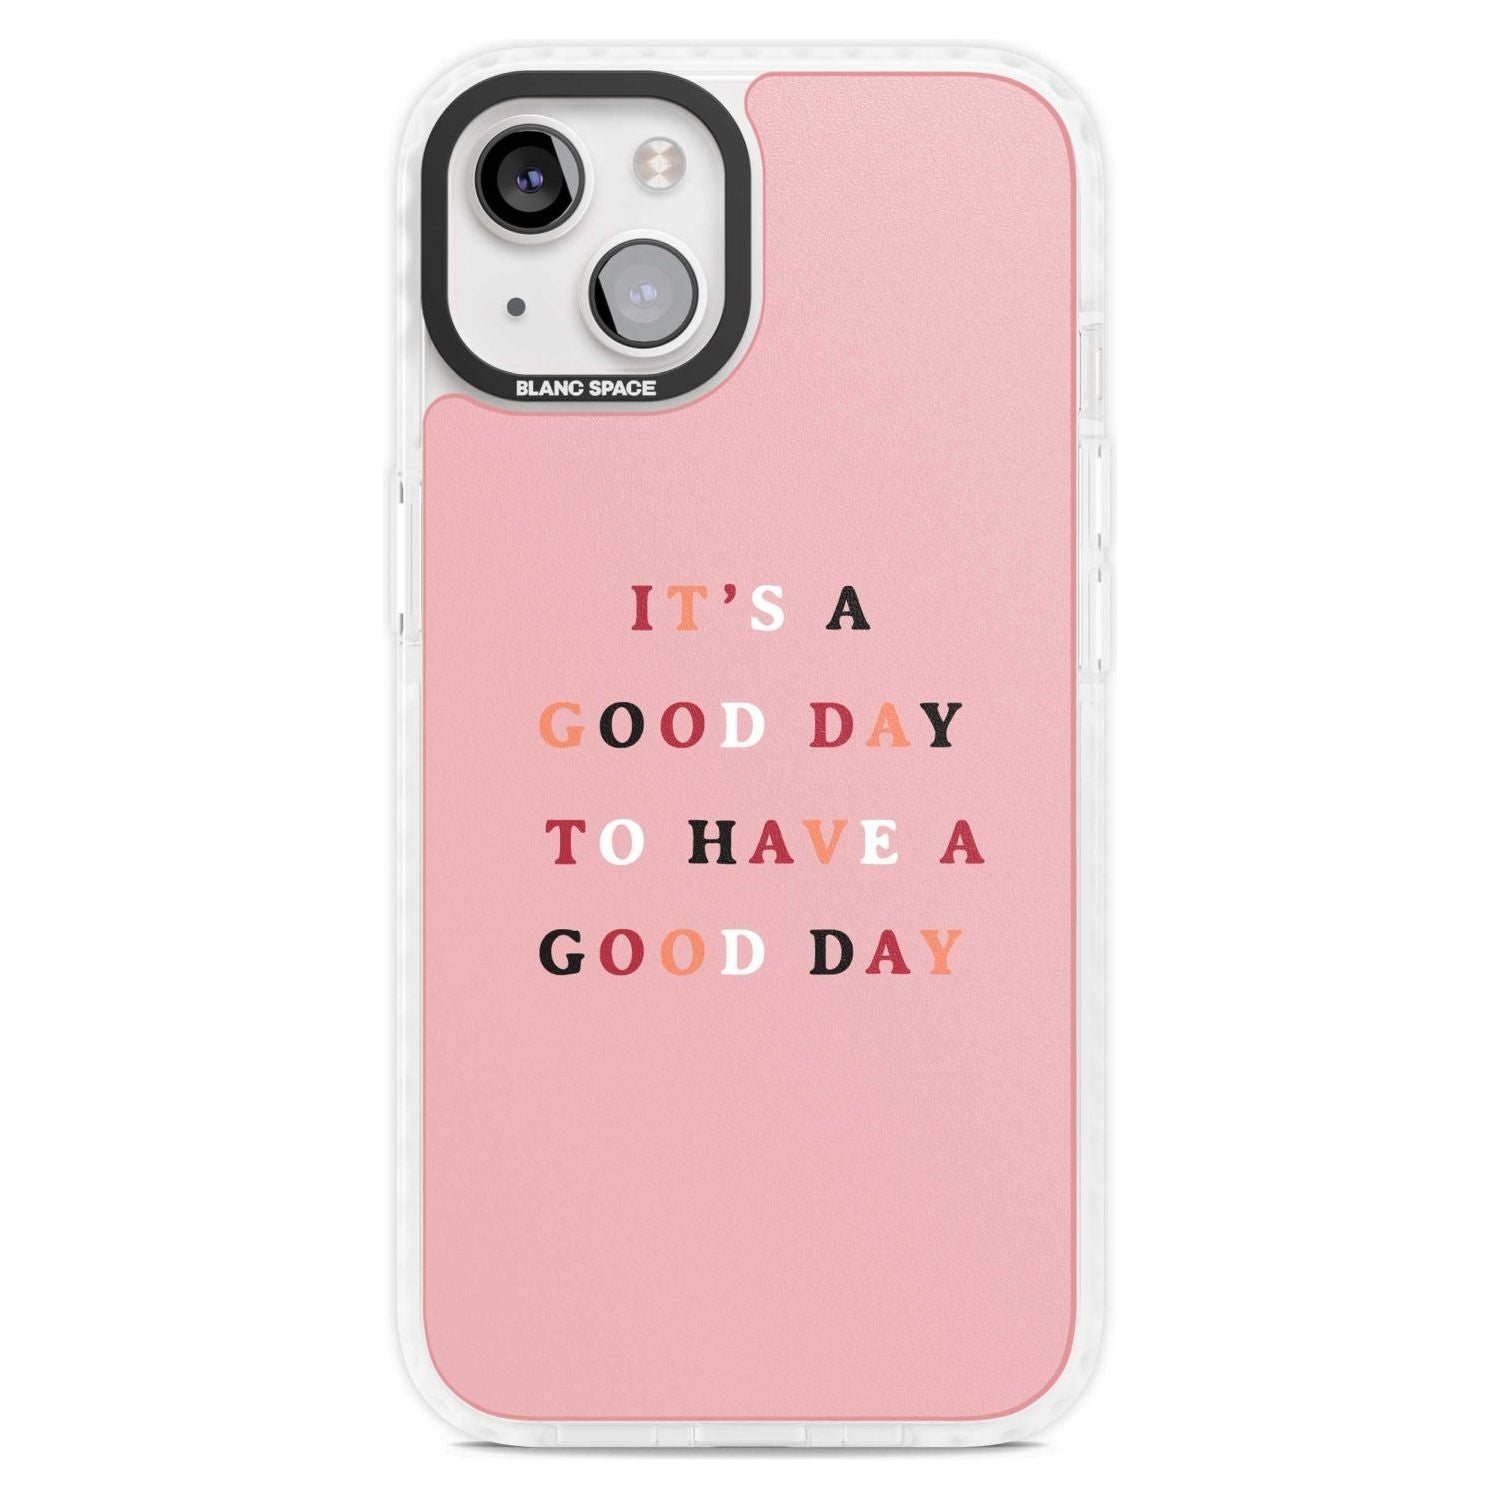 It's a good day to have a good day Phone Case iPhone 15 Plus / Magsafe Impact Case,iPhone 15 / Magsafe Impact Case Blanc Space